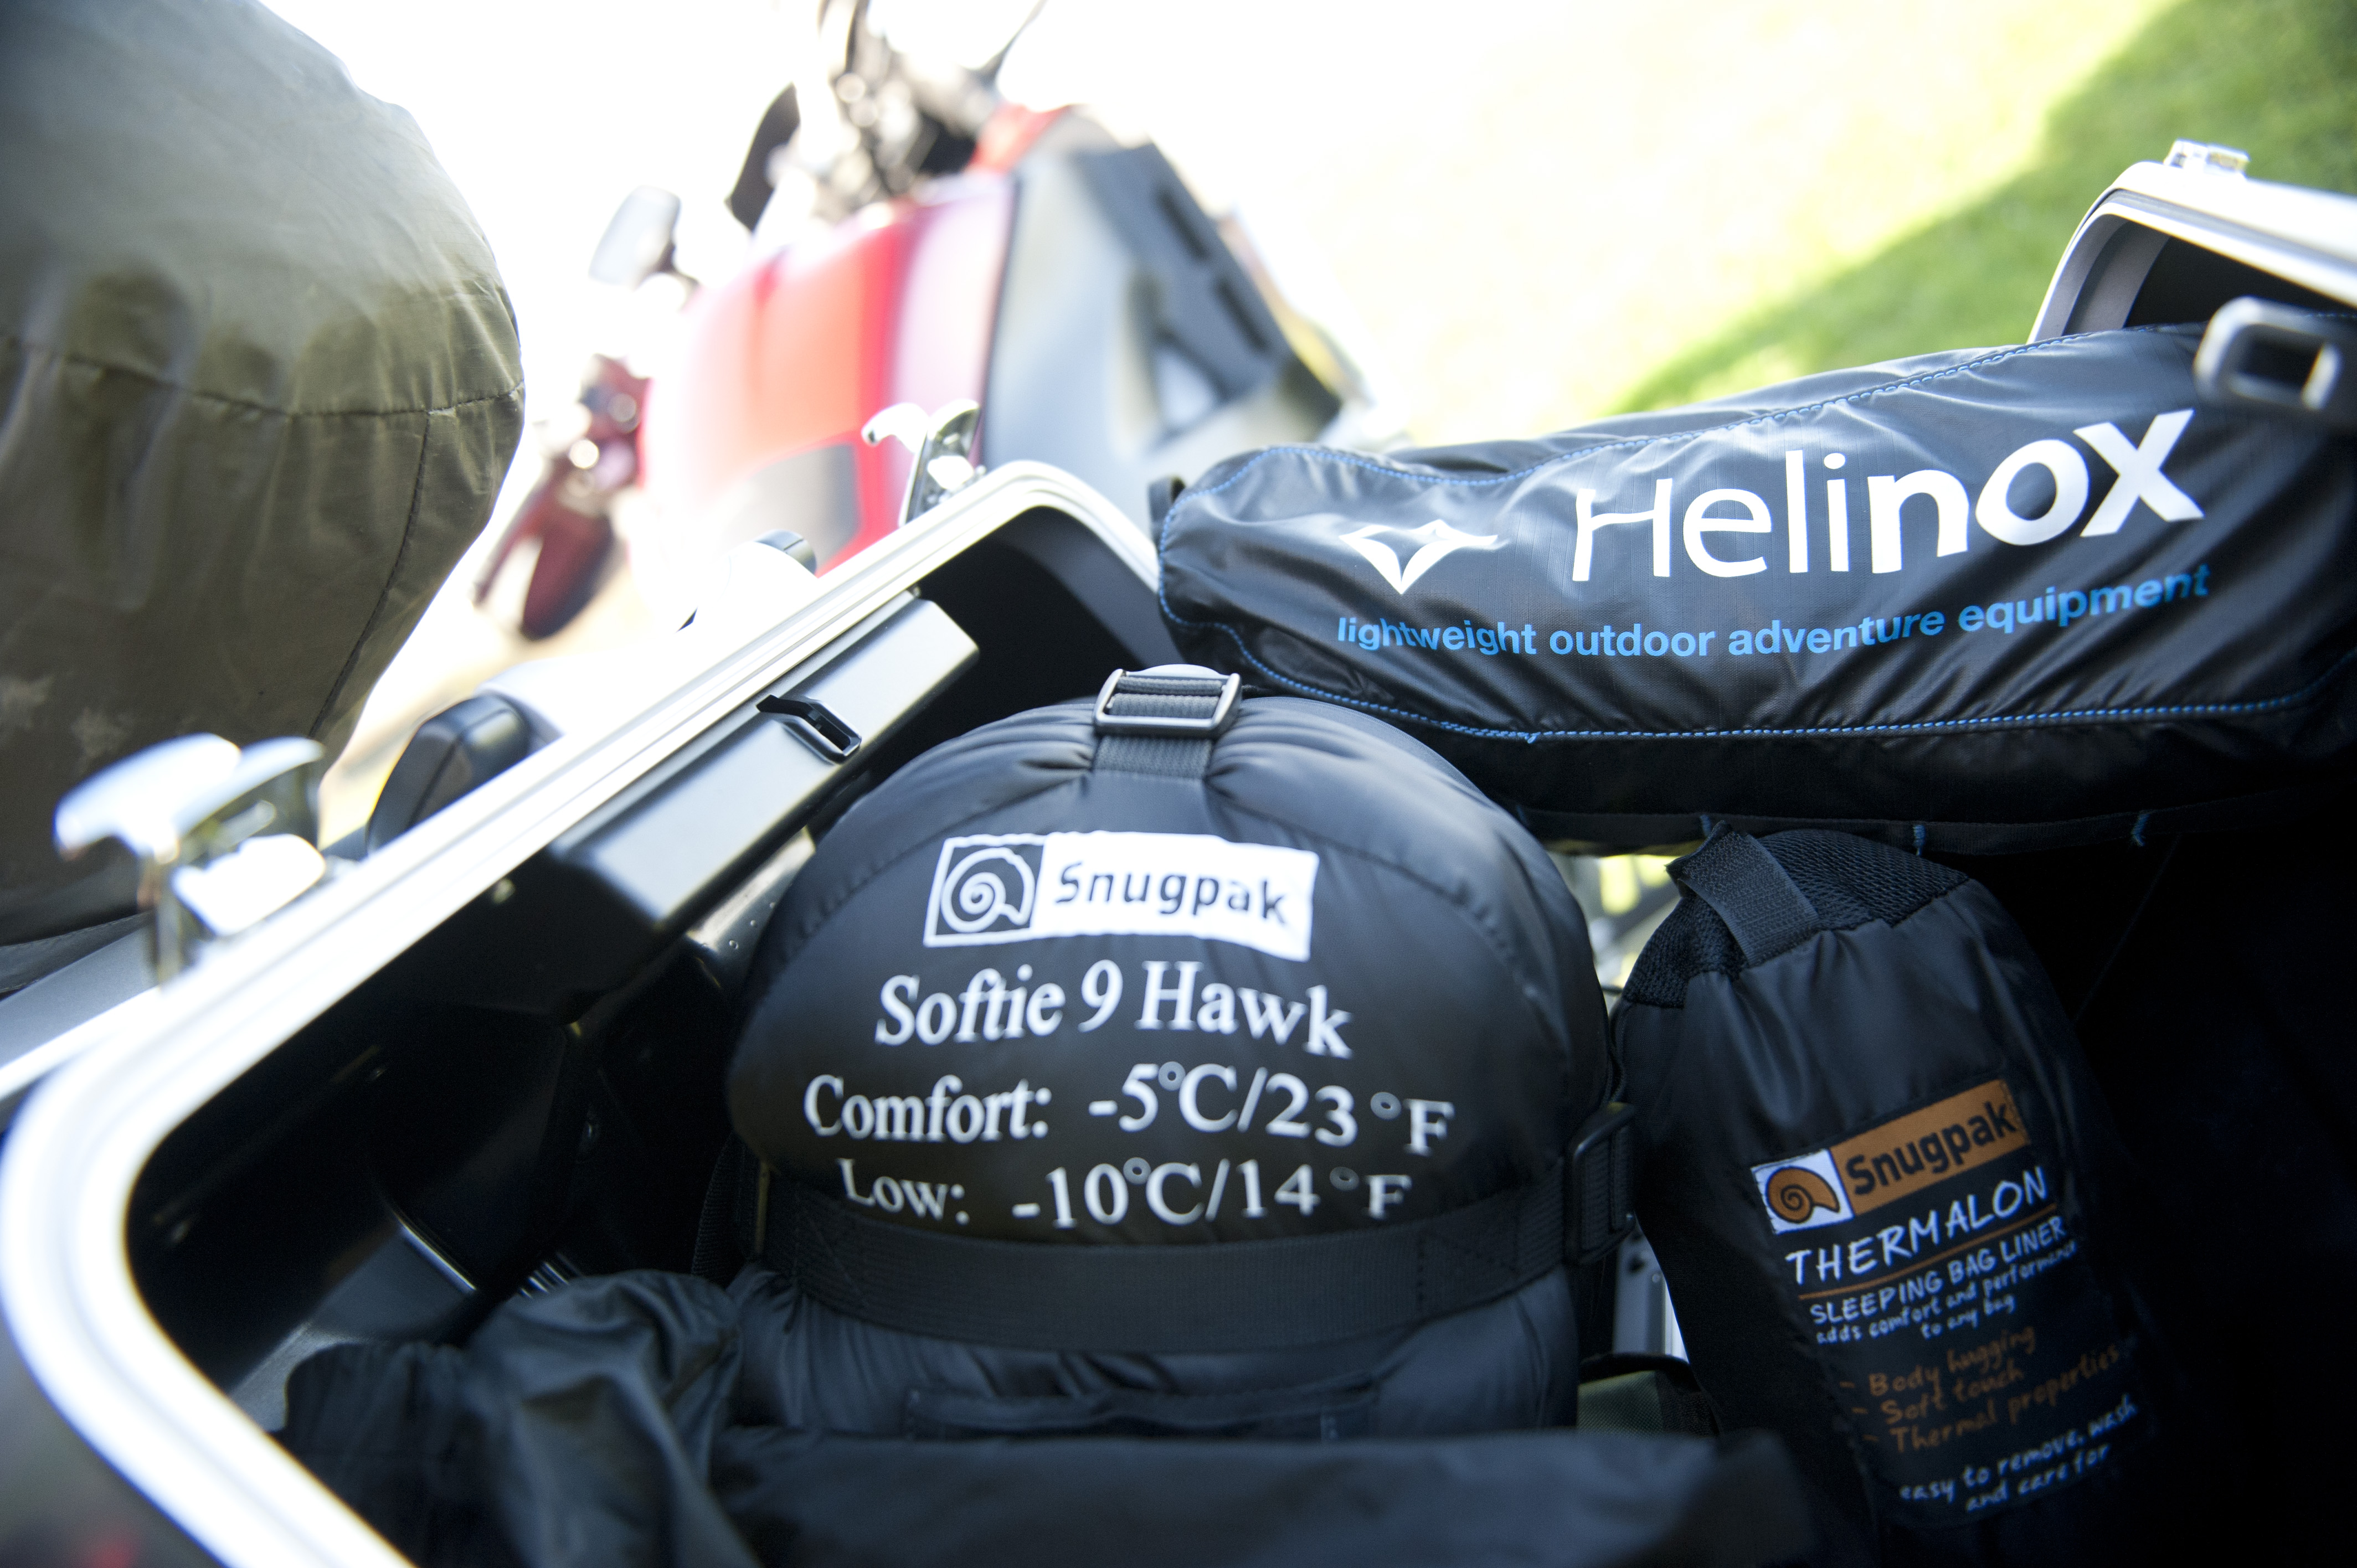 What's in your panniers?